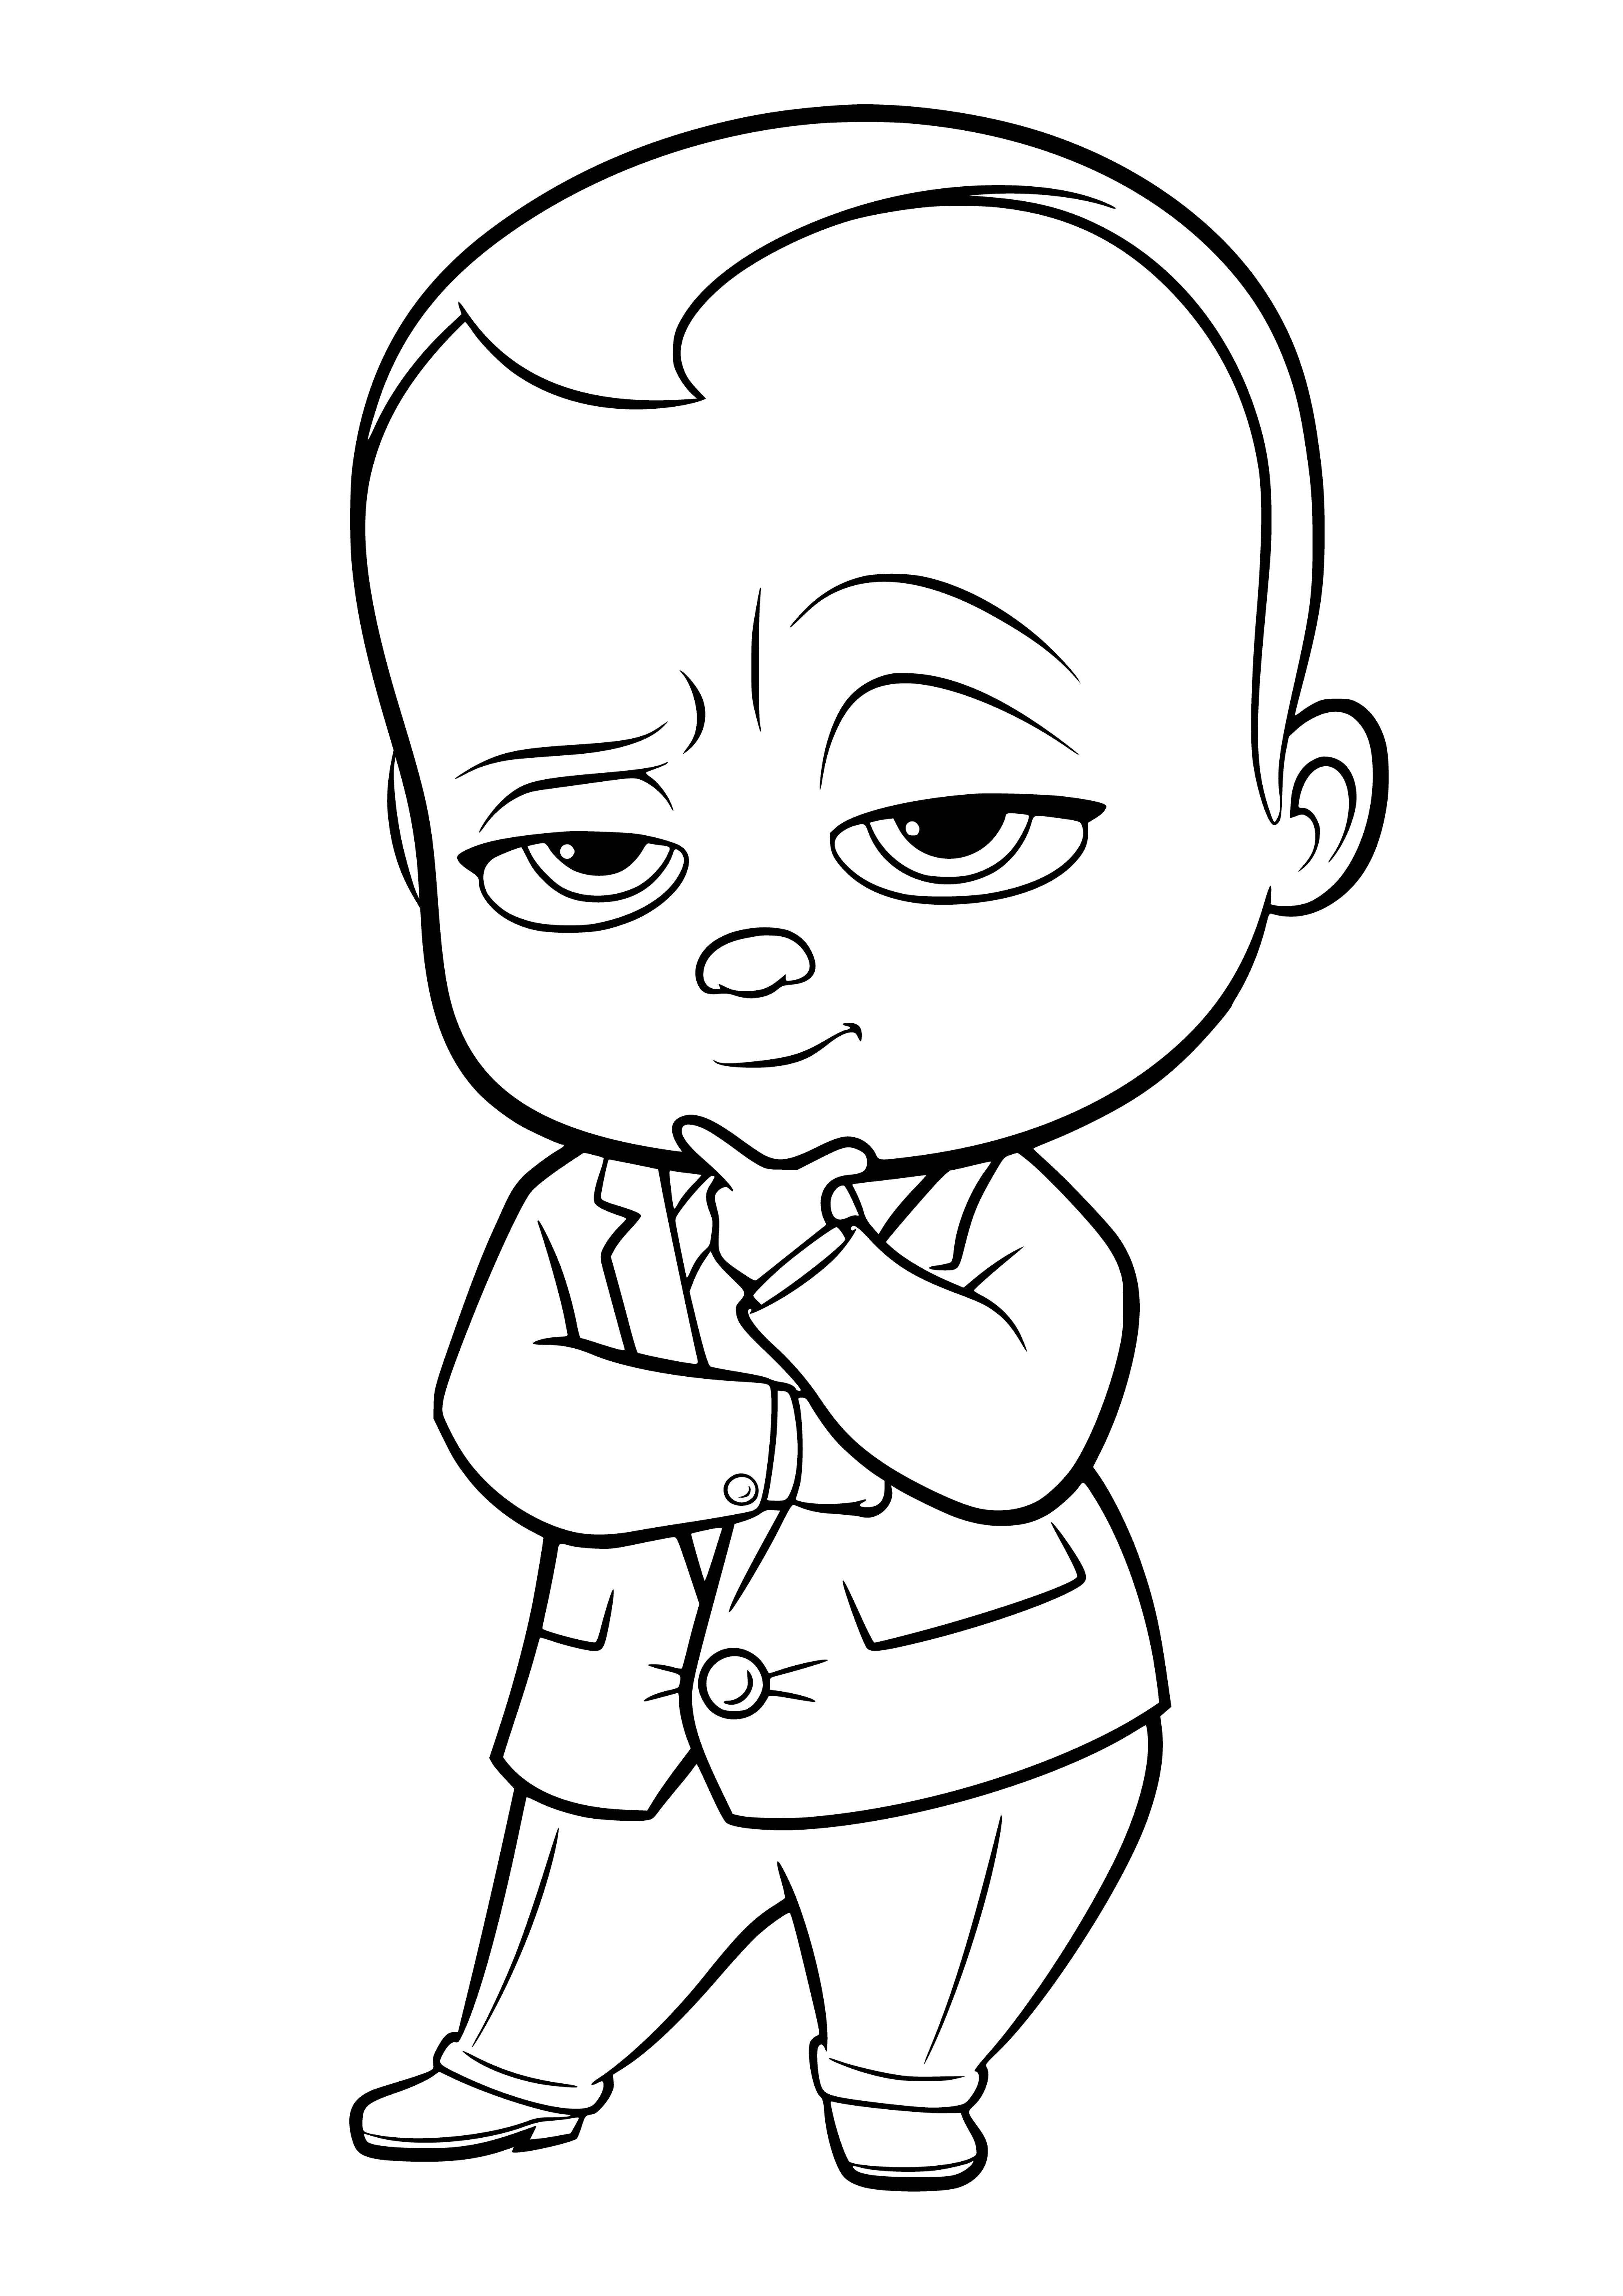 Boss Sucker in Suit coloring page